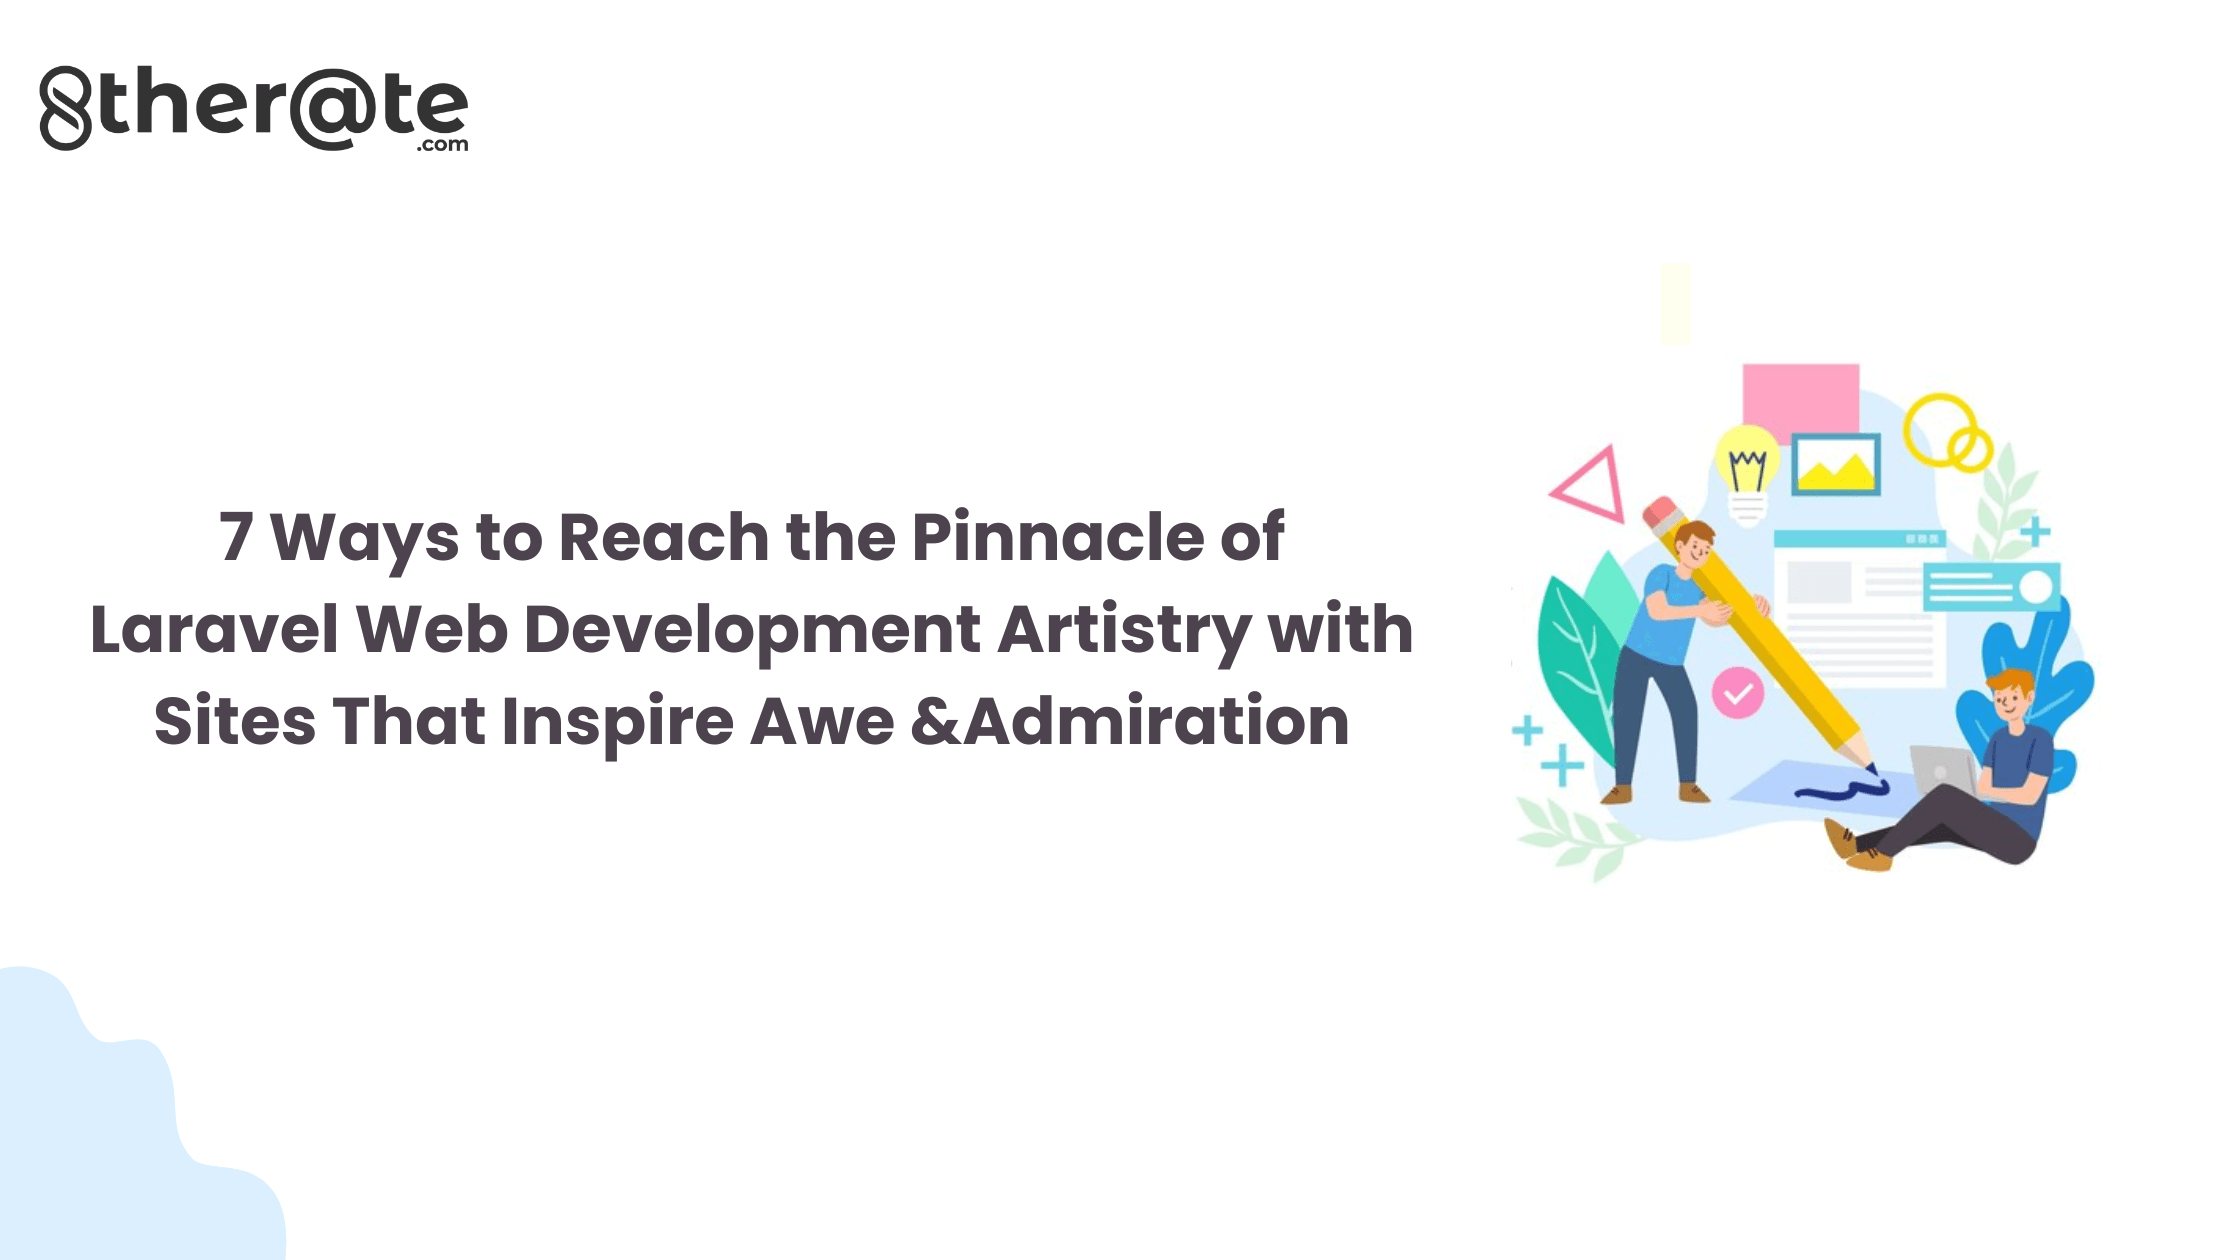 7 Ways to Reach the Pinnacle of Laravel Web Development Artistry with Sites That Inspire Awe &Admiration